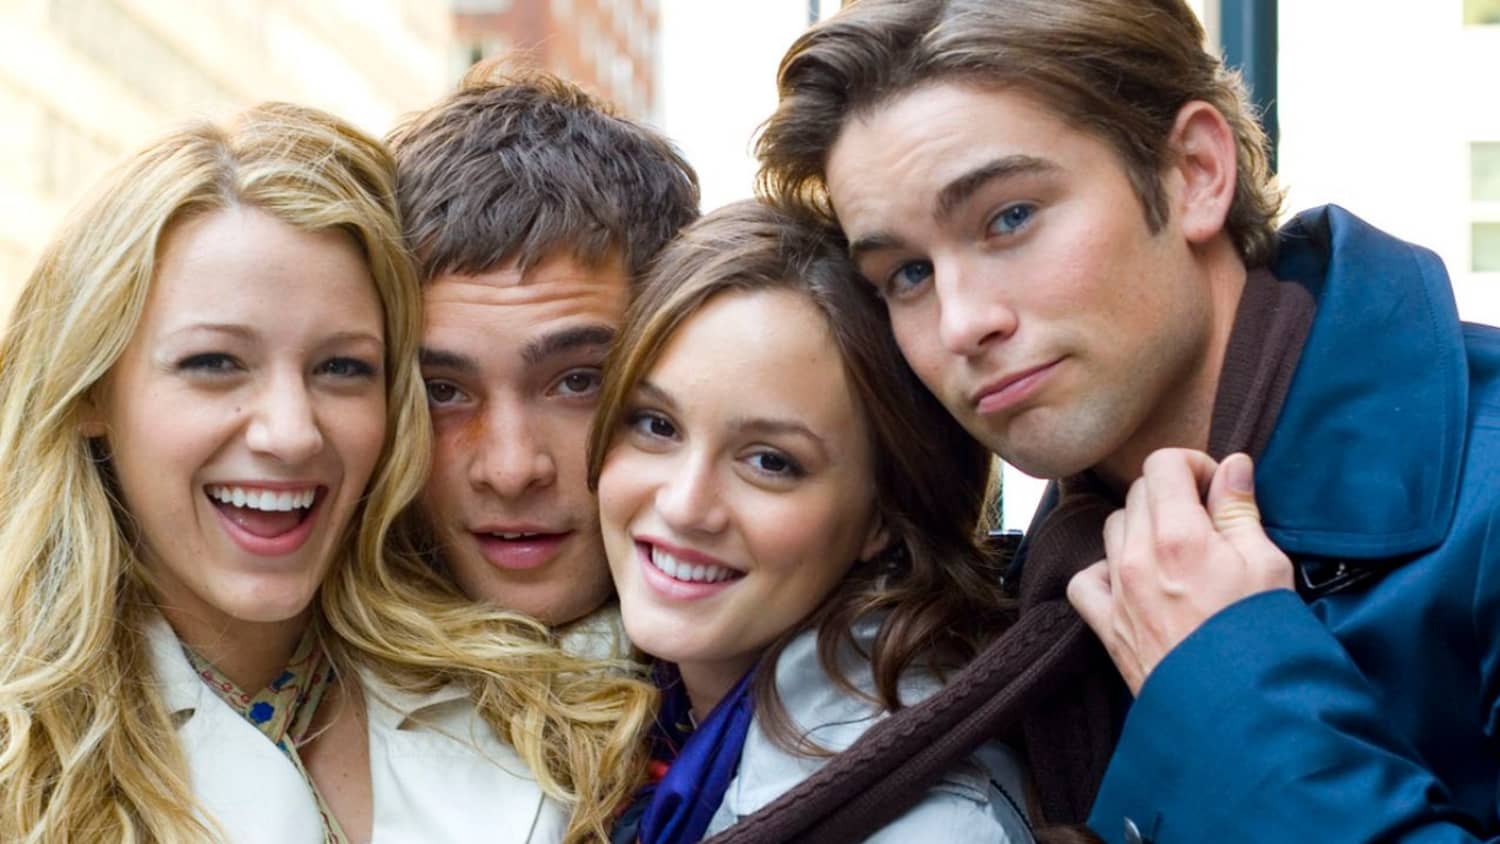 The One Episode of Gossip Girl You Should Rewatch